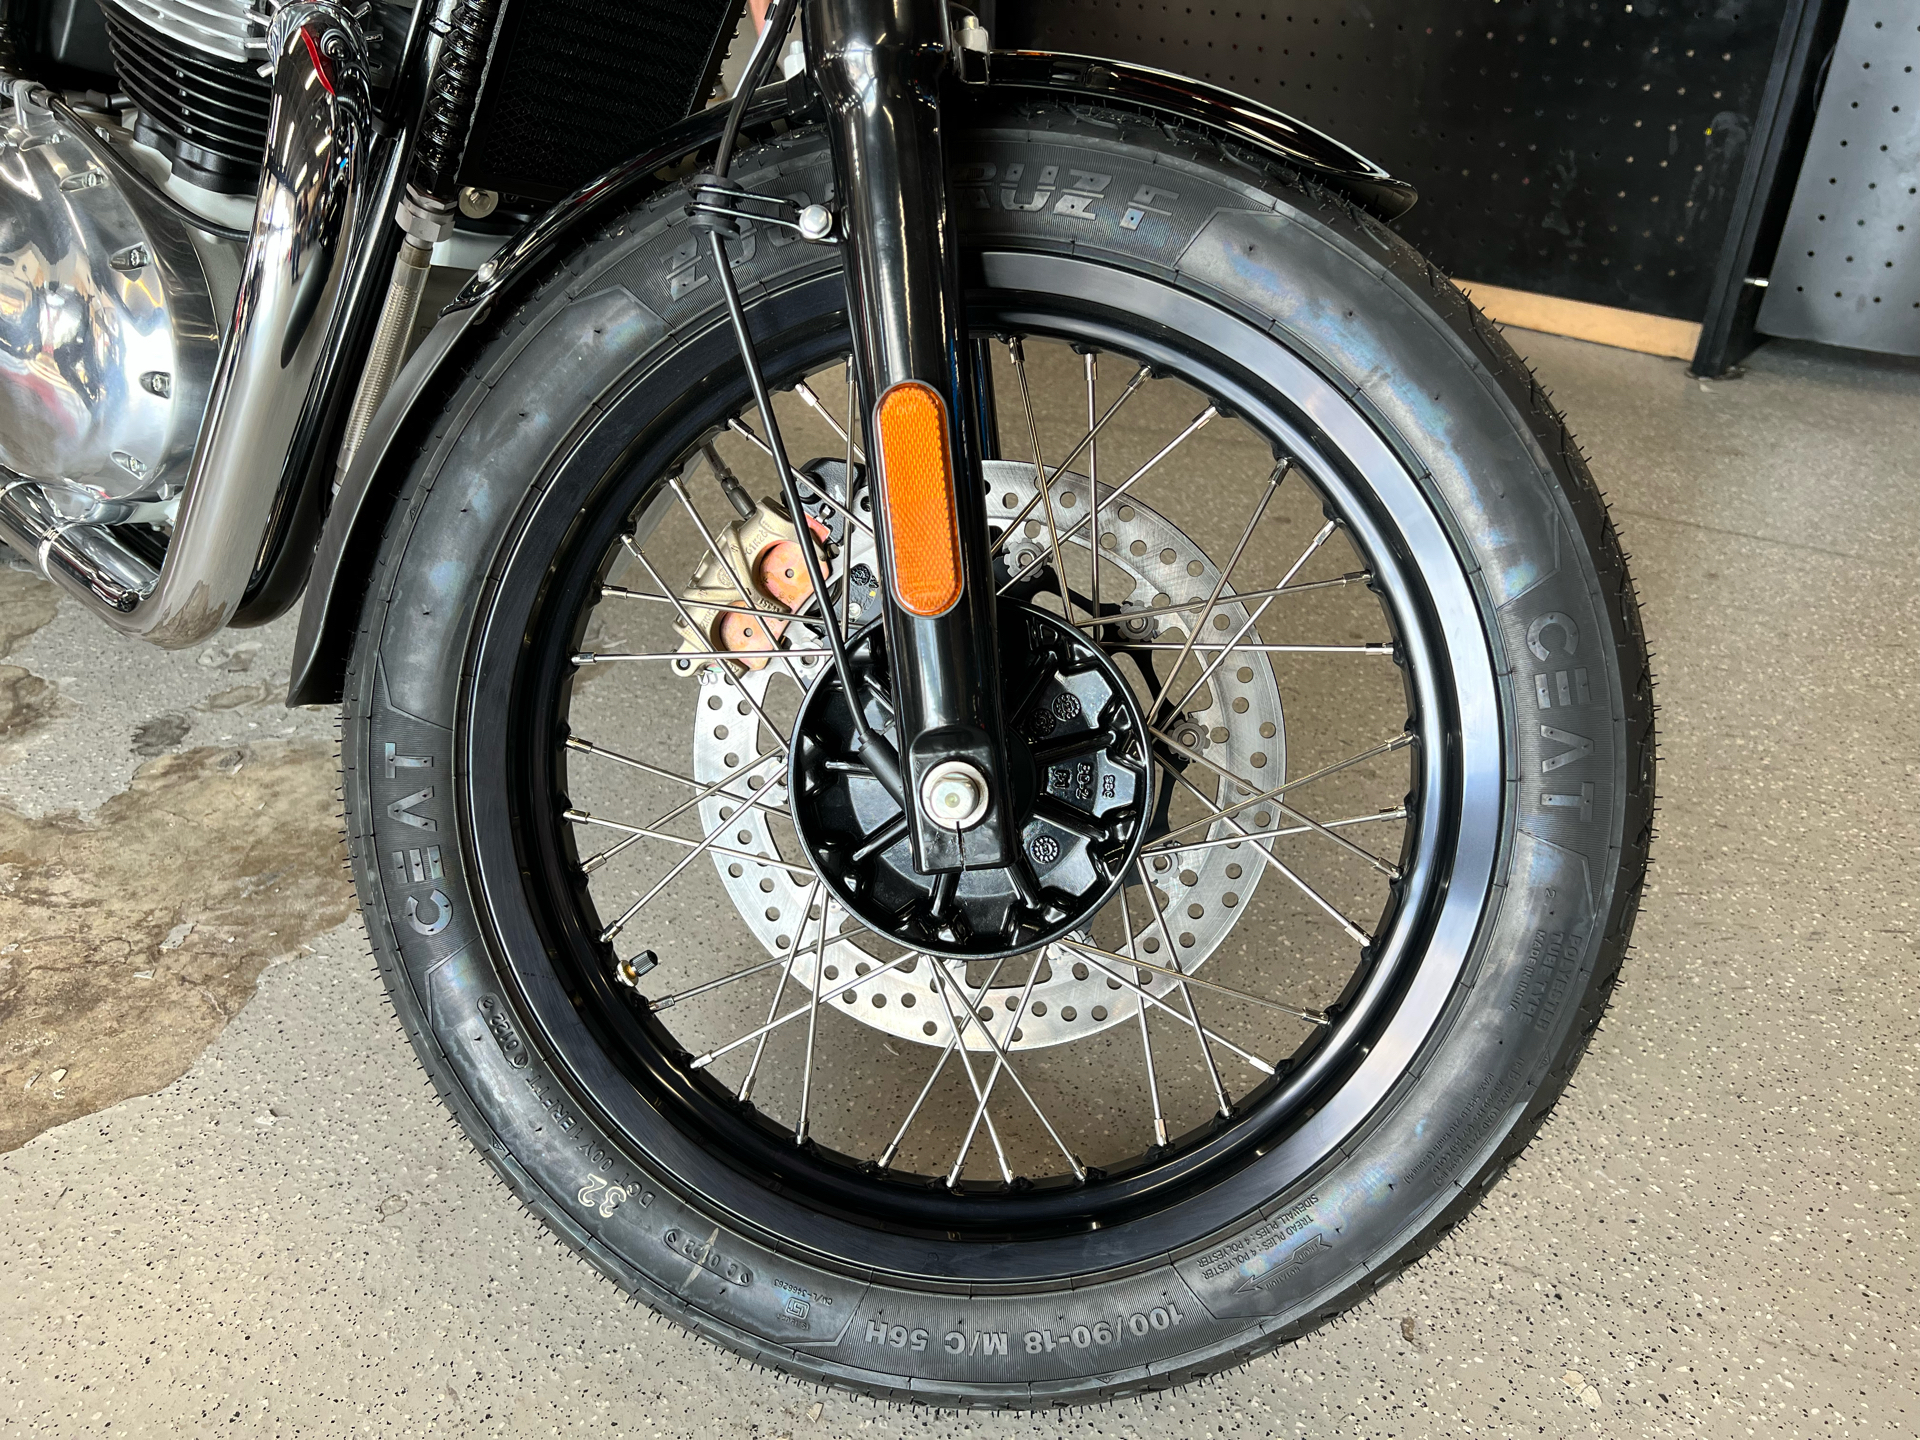 2022 Royal Enfield Continental GT 650 in Fort Myers, Florida - Photo 13